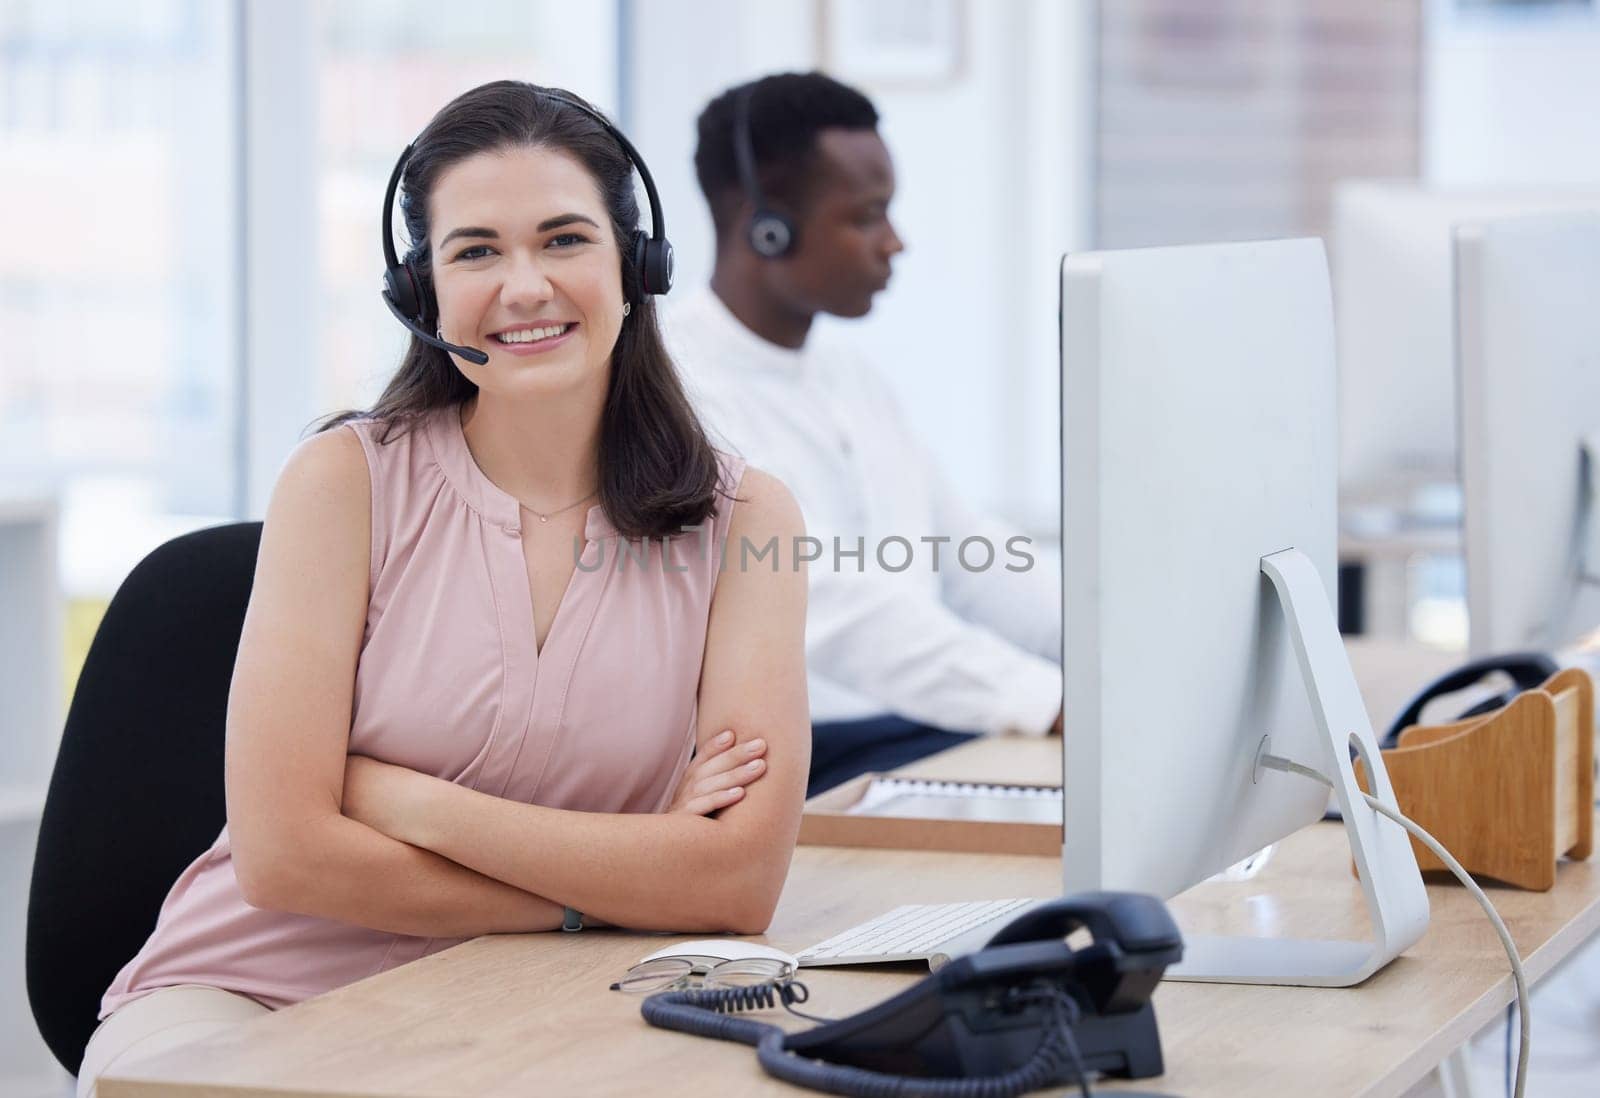 Call center, proud portrait and woman consultant, telemarketing agent or crm communication worker smile. Telecom, virtual advisor or technical support person in office online consulting or networking by YuriArcurs